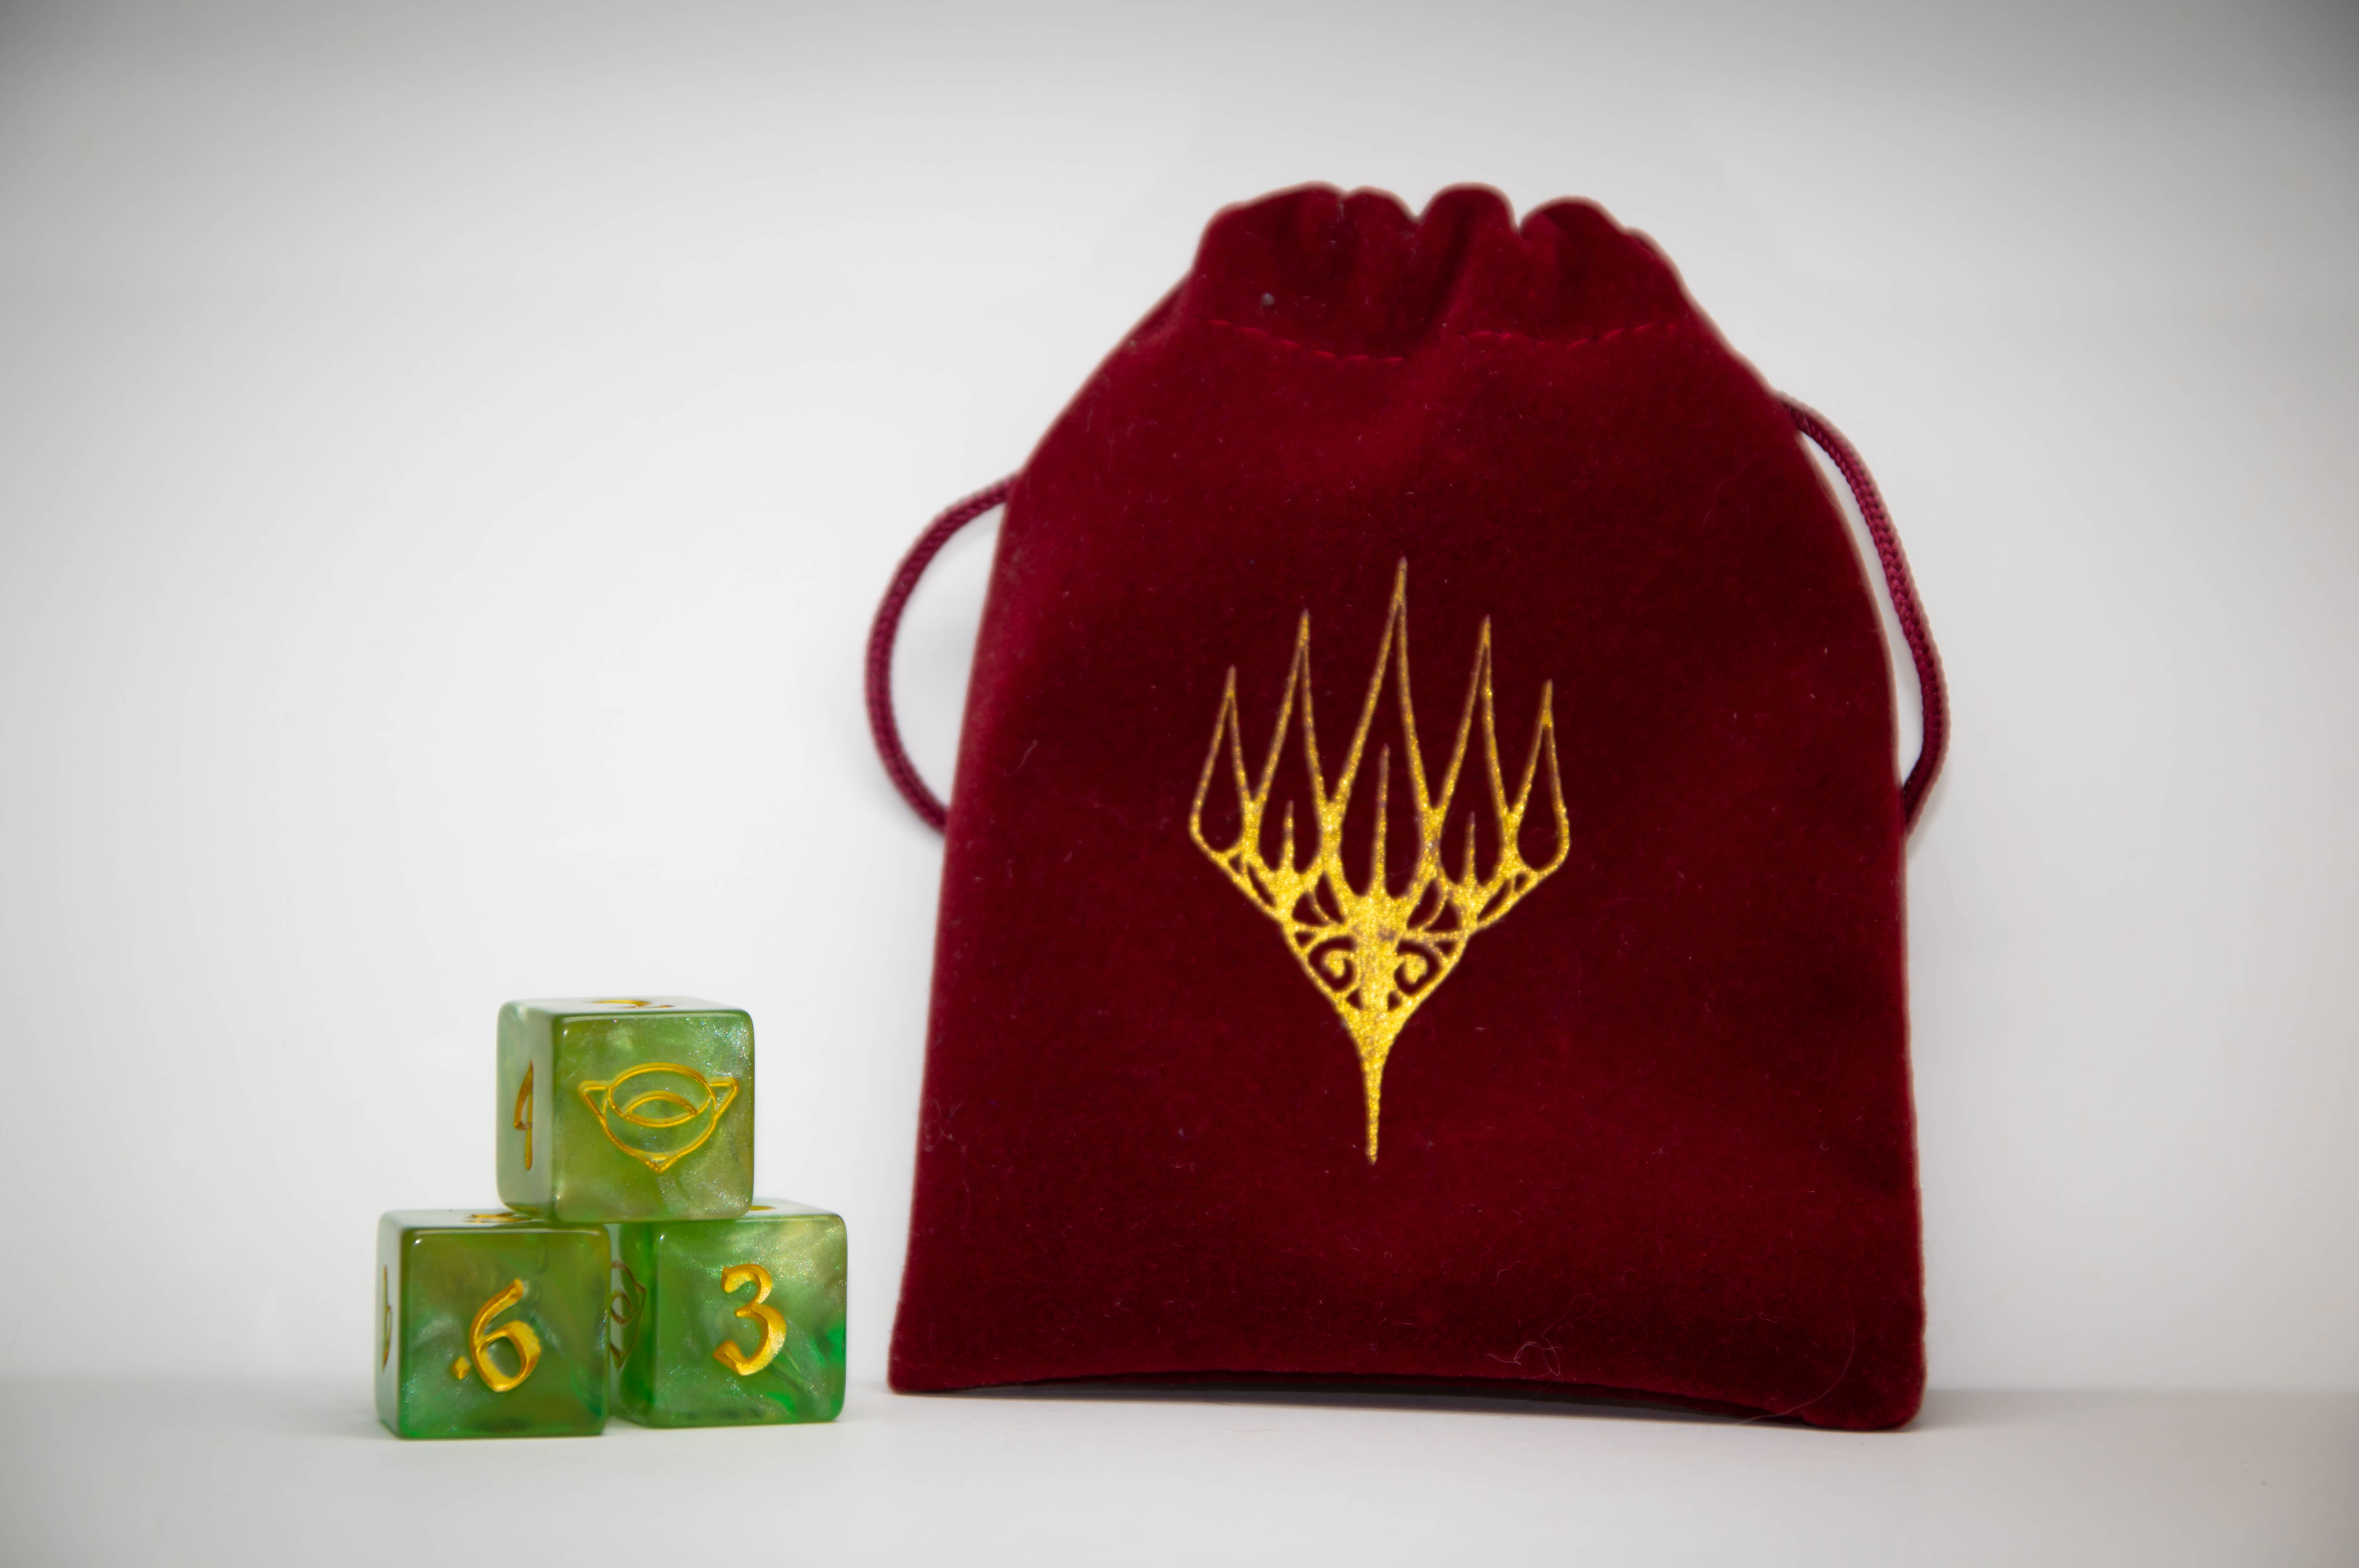 sage green LTR dice set next to a maroon dice bag